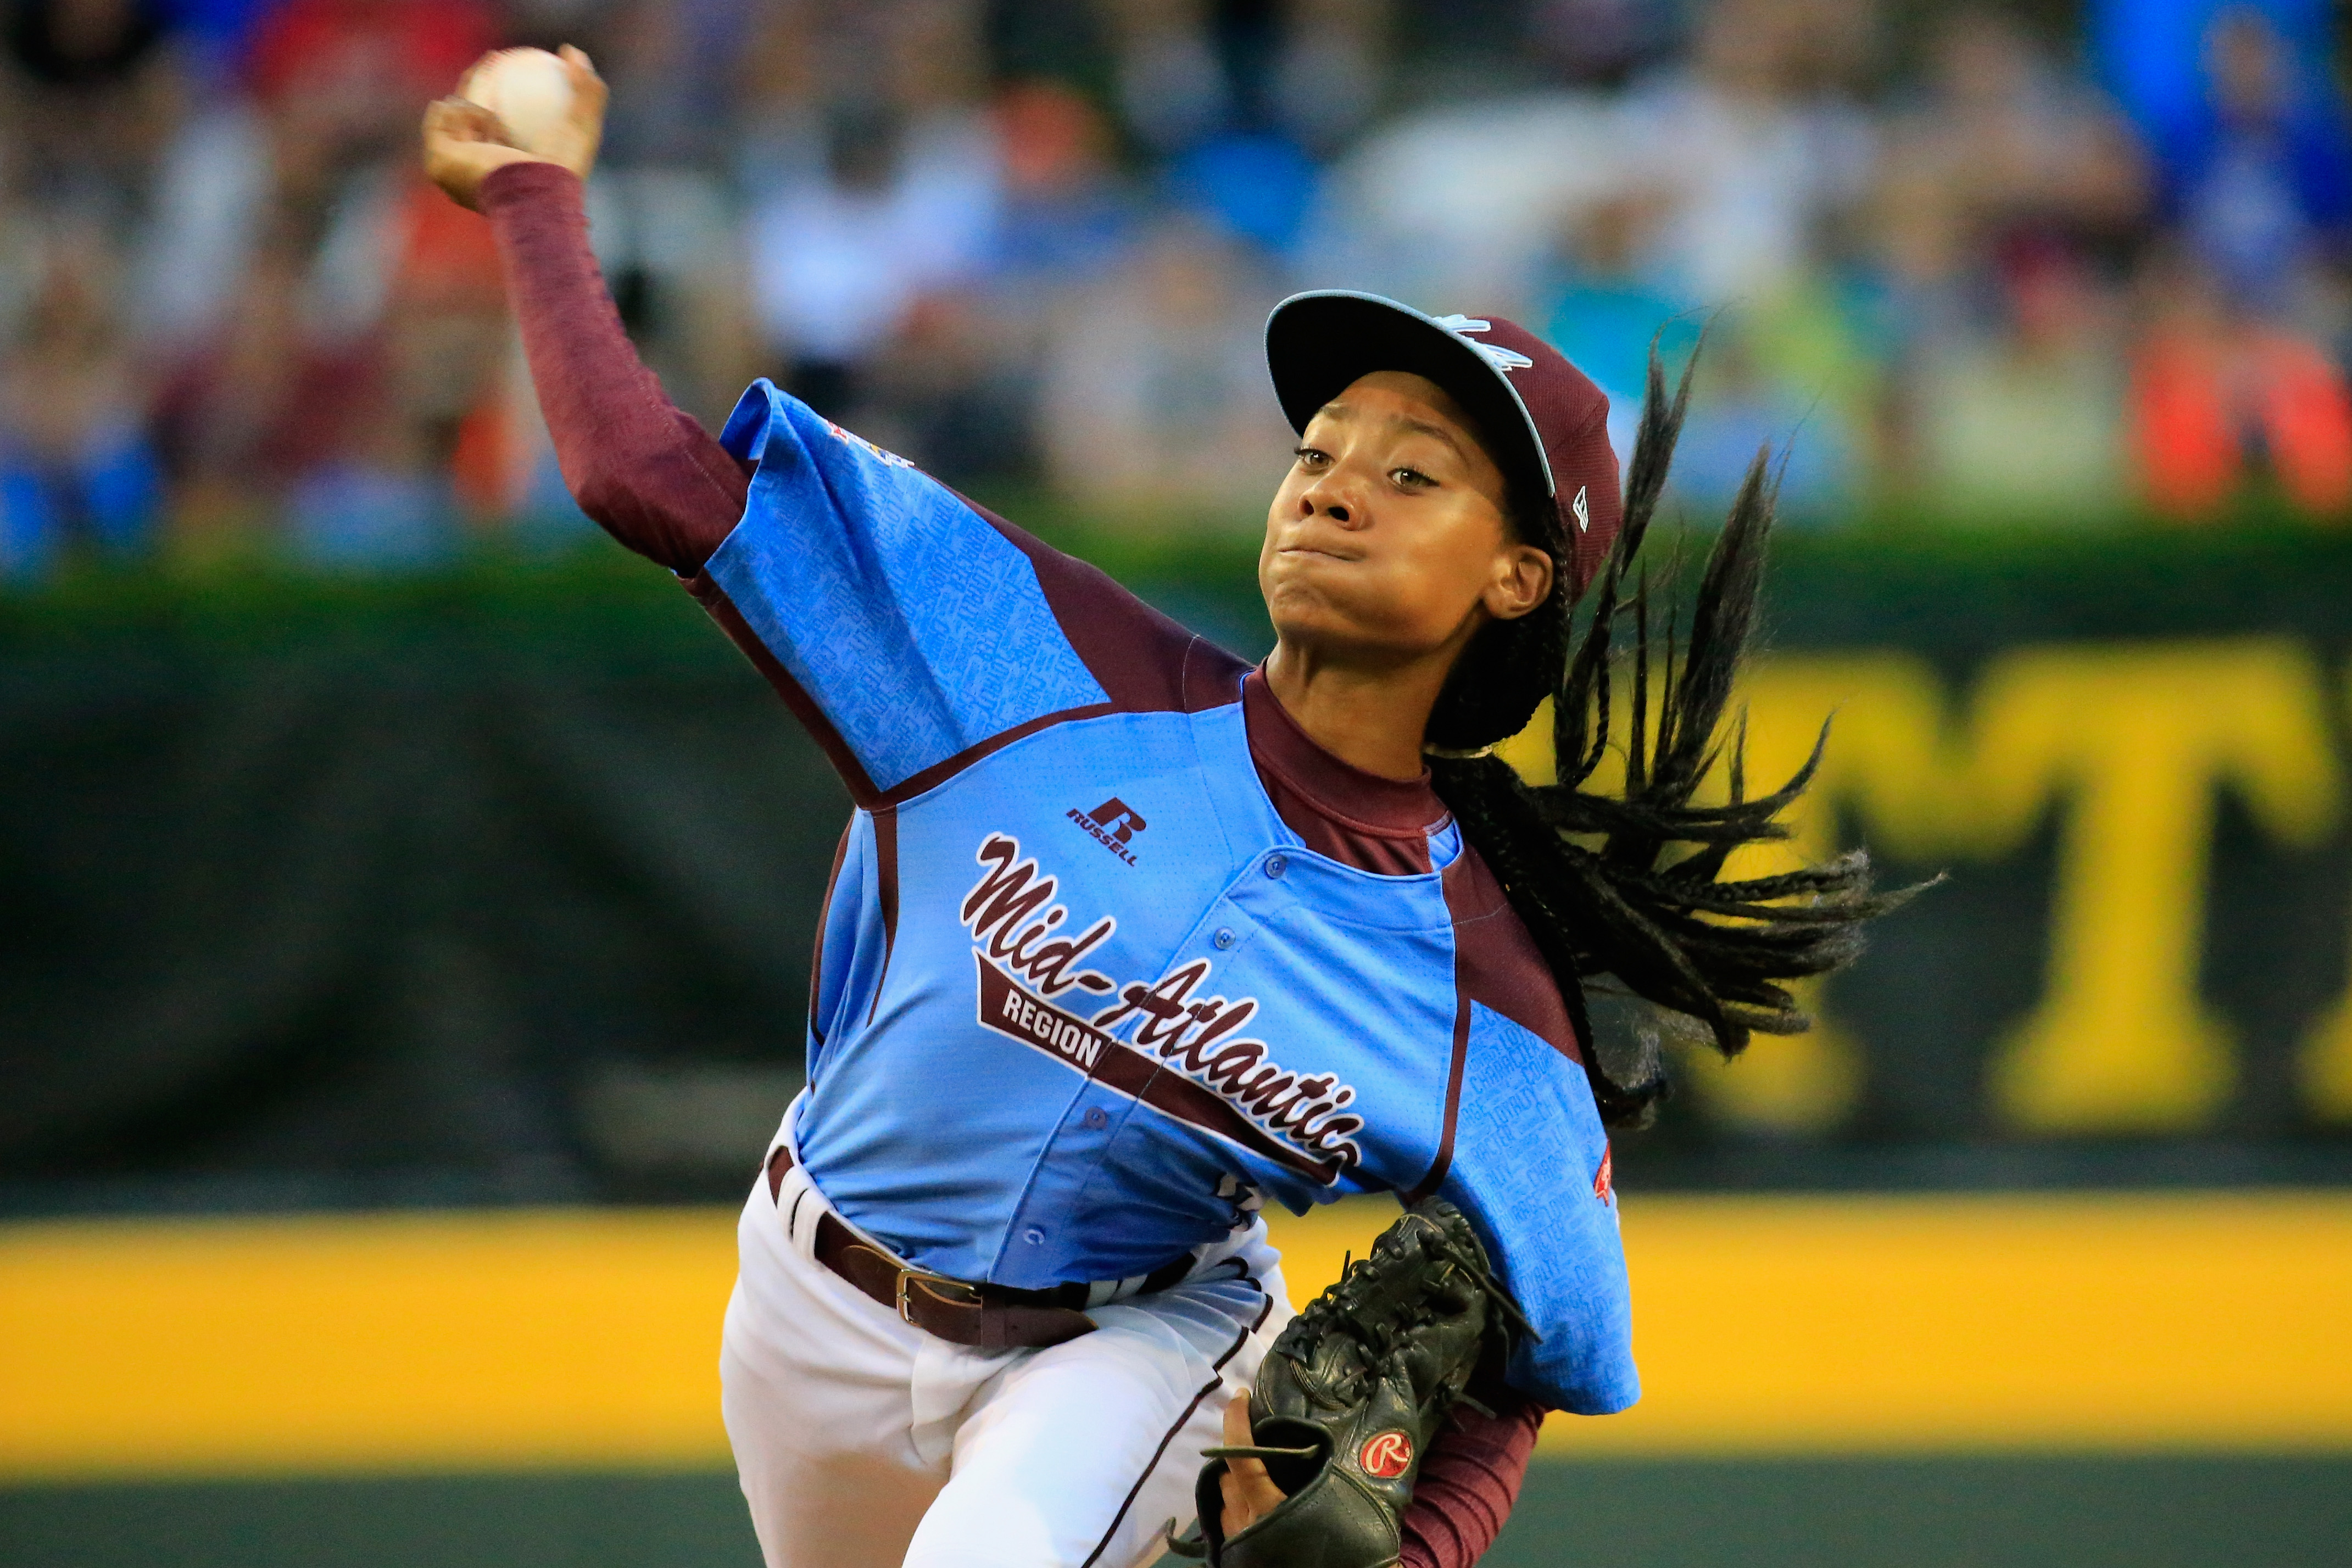 Mo'ne Davis of Pennsylvania pitches  during the first inning of the United States division game at the Little League World Series tournament on August 20, 2014 in South Williamsport, Pennsylvania. (Rob Carr/Getty Images)